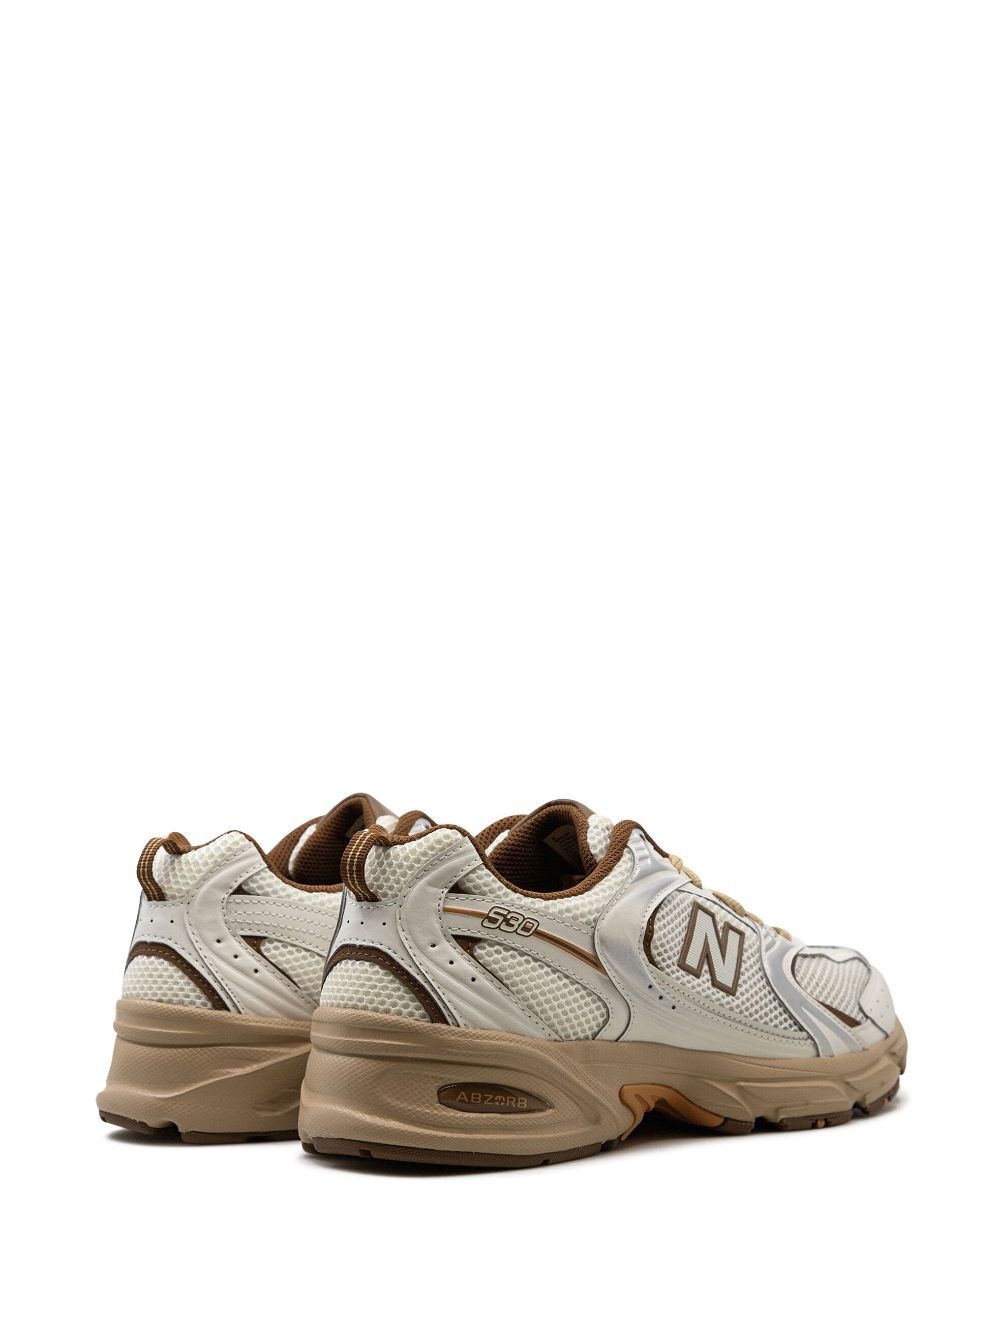 530 "Off-White/Brown" sneakers - 3